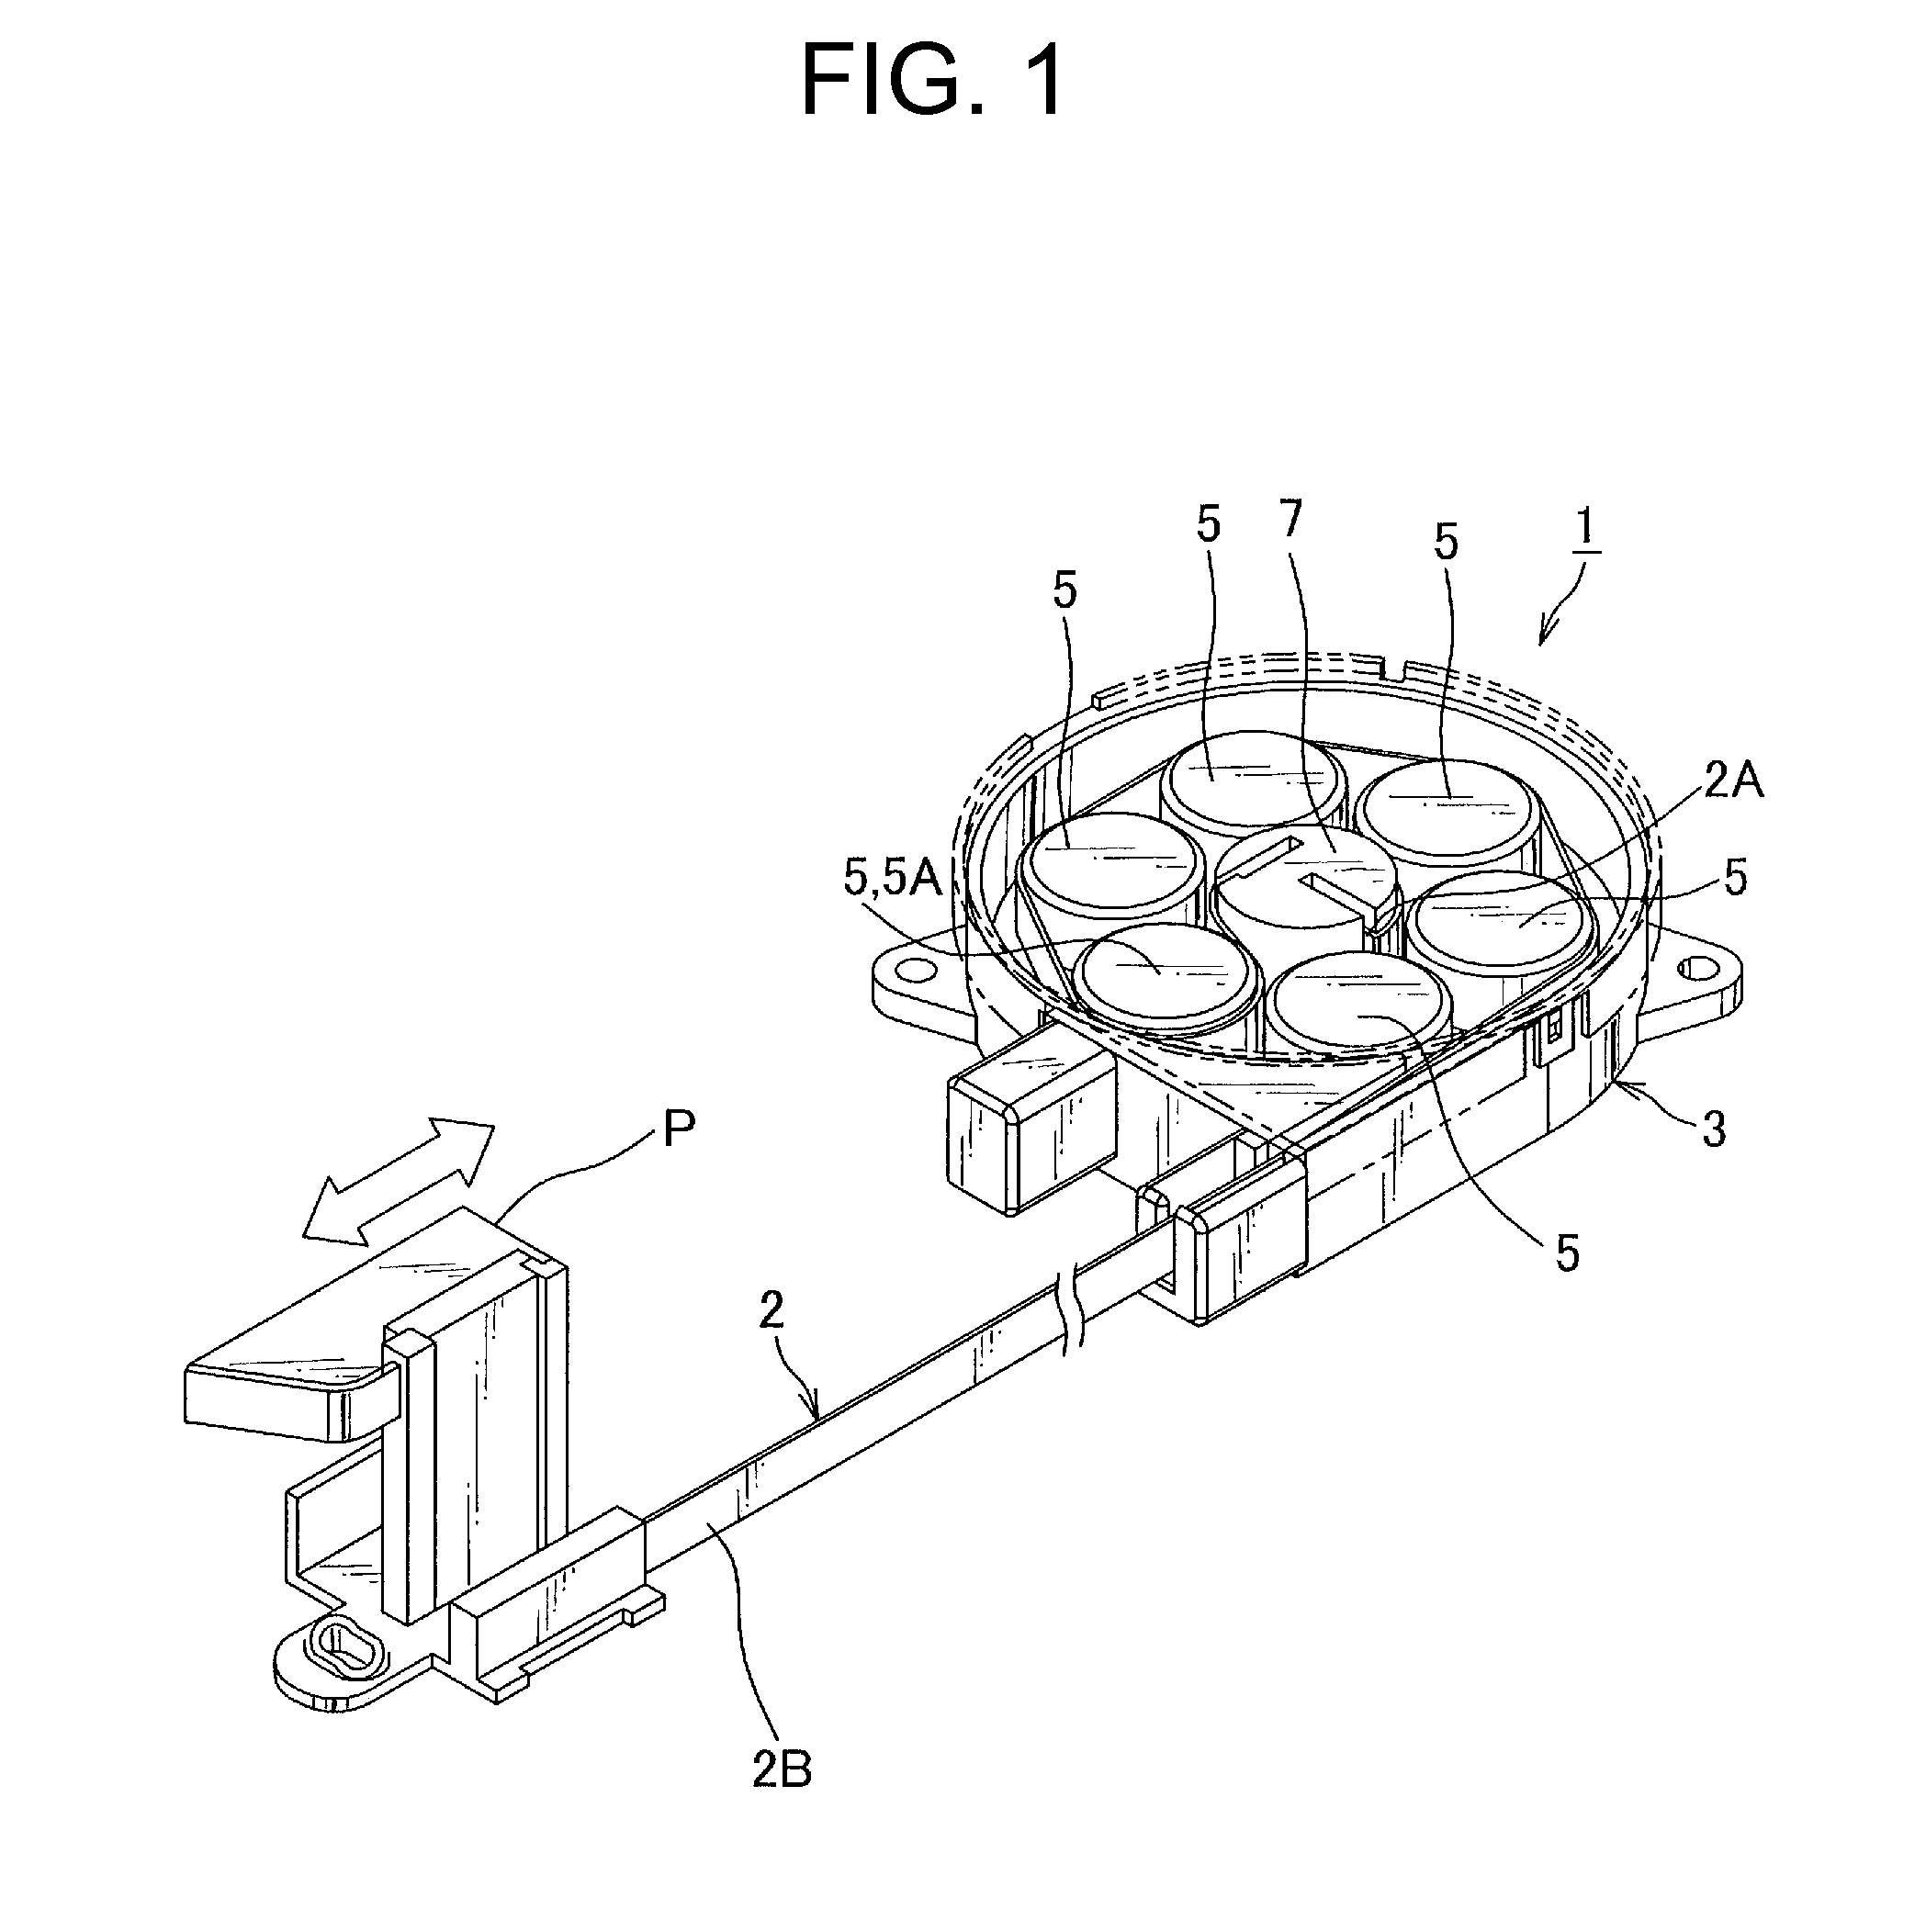 Flat cable reeling device